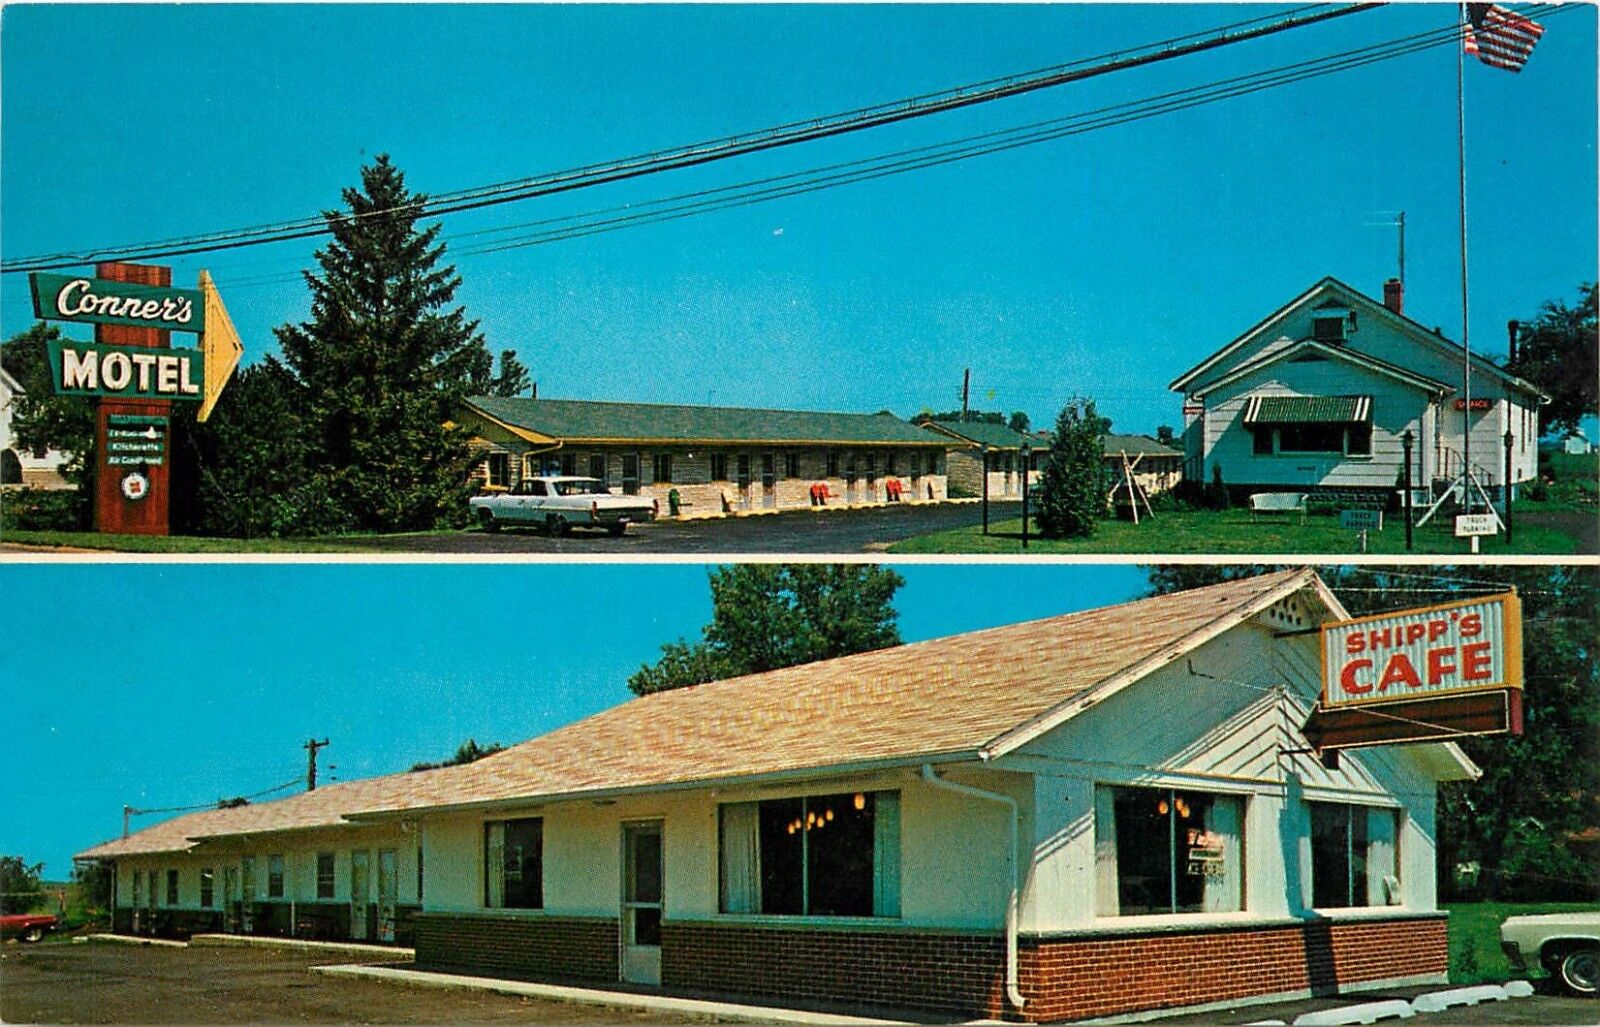 Conners New Motel Rockford Illinois IL old cars Postcard